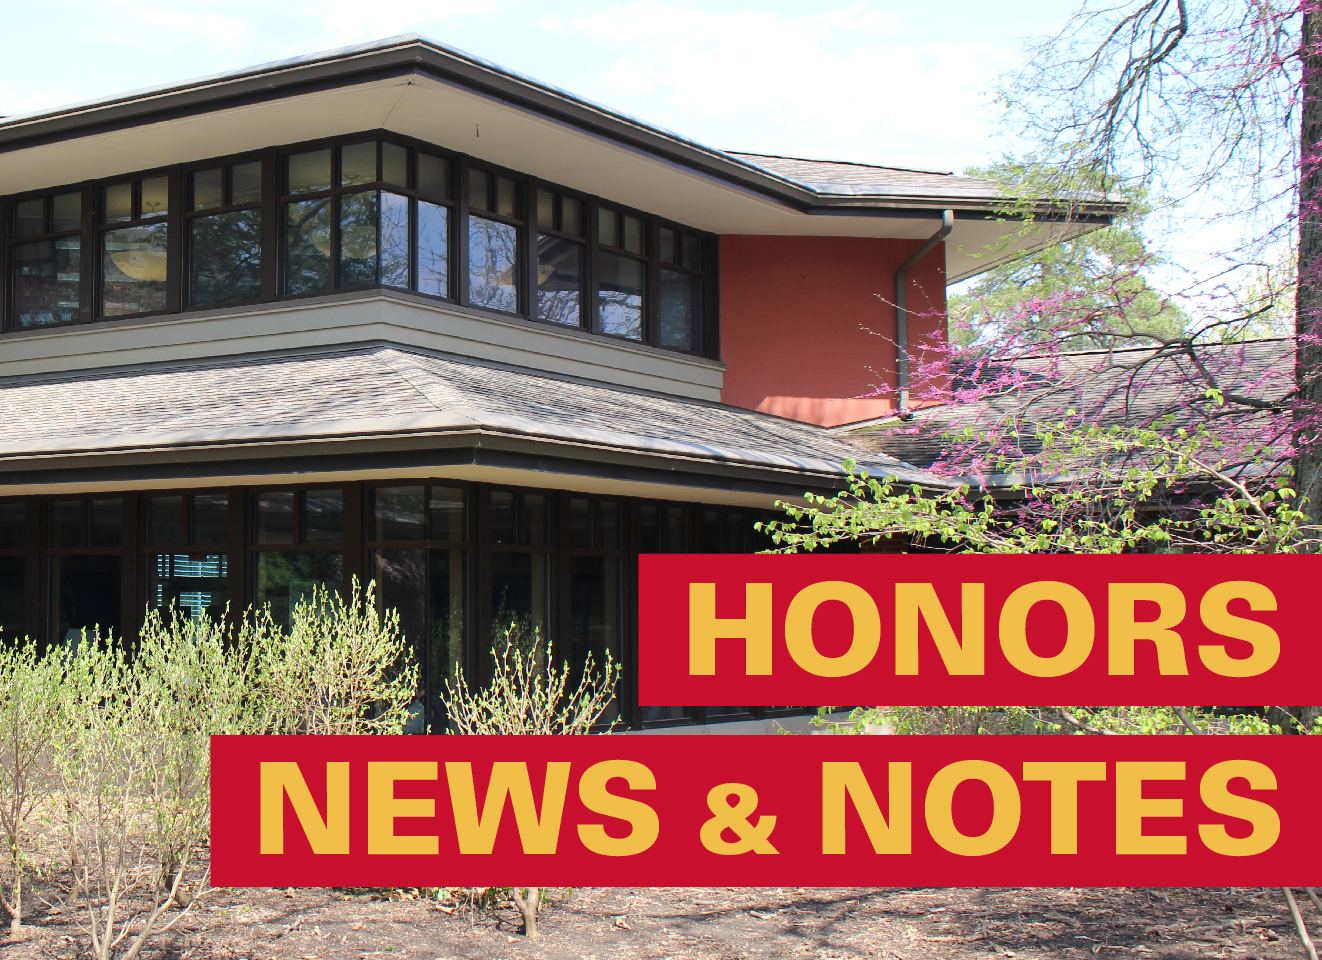 Image of Jischke Honors Building with "Honors News & Notes" written overtop it.